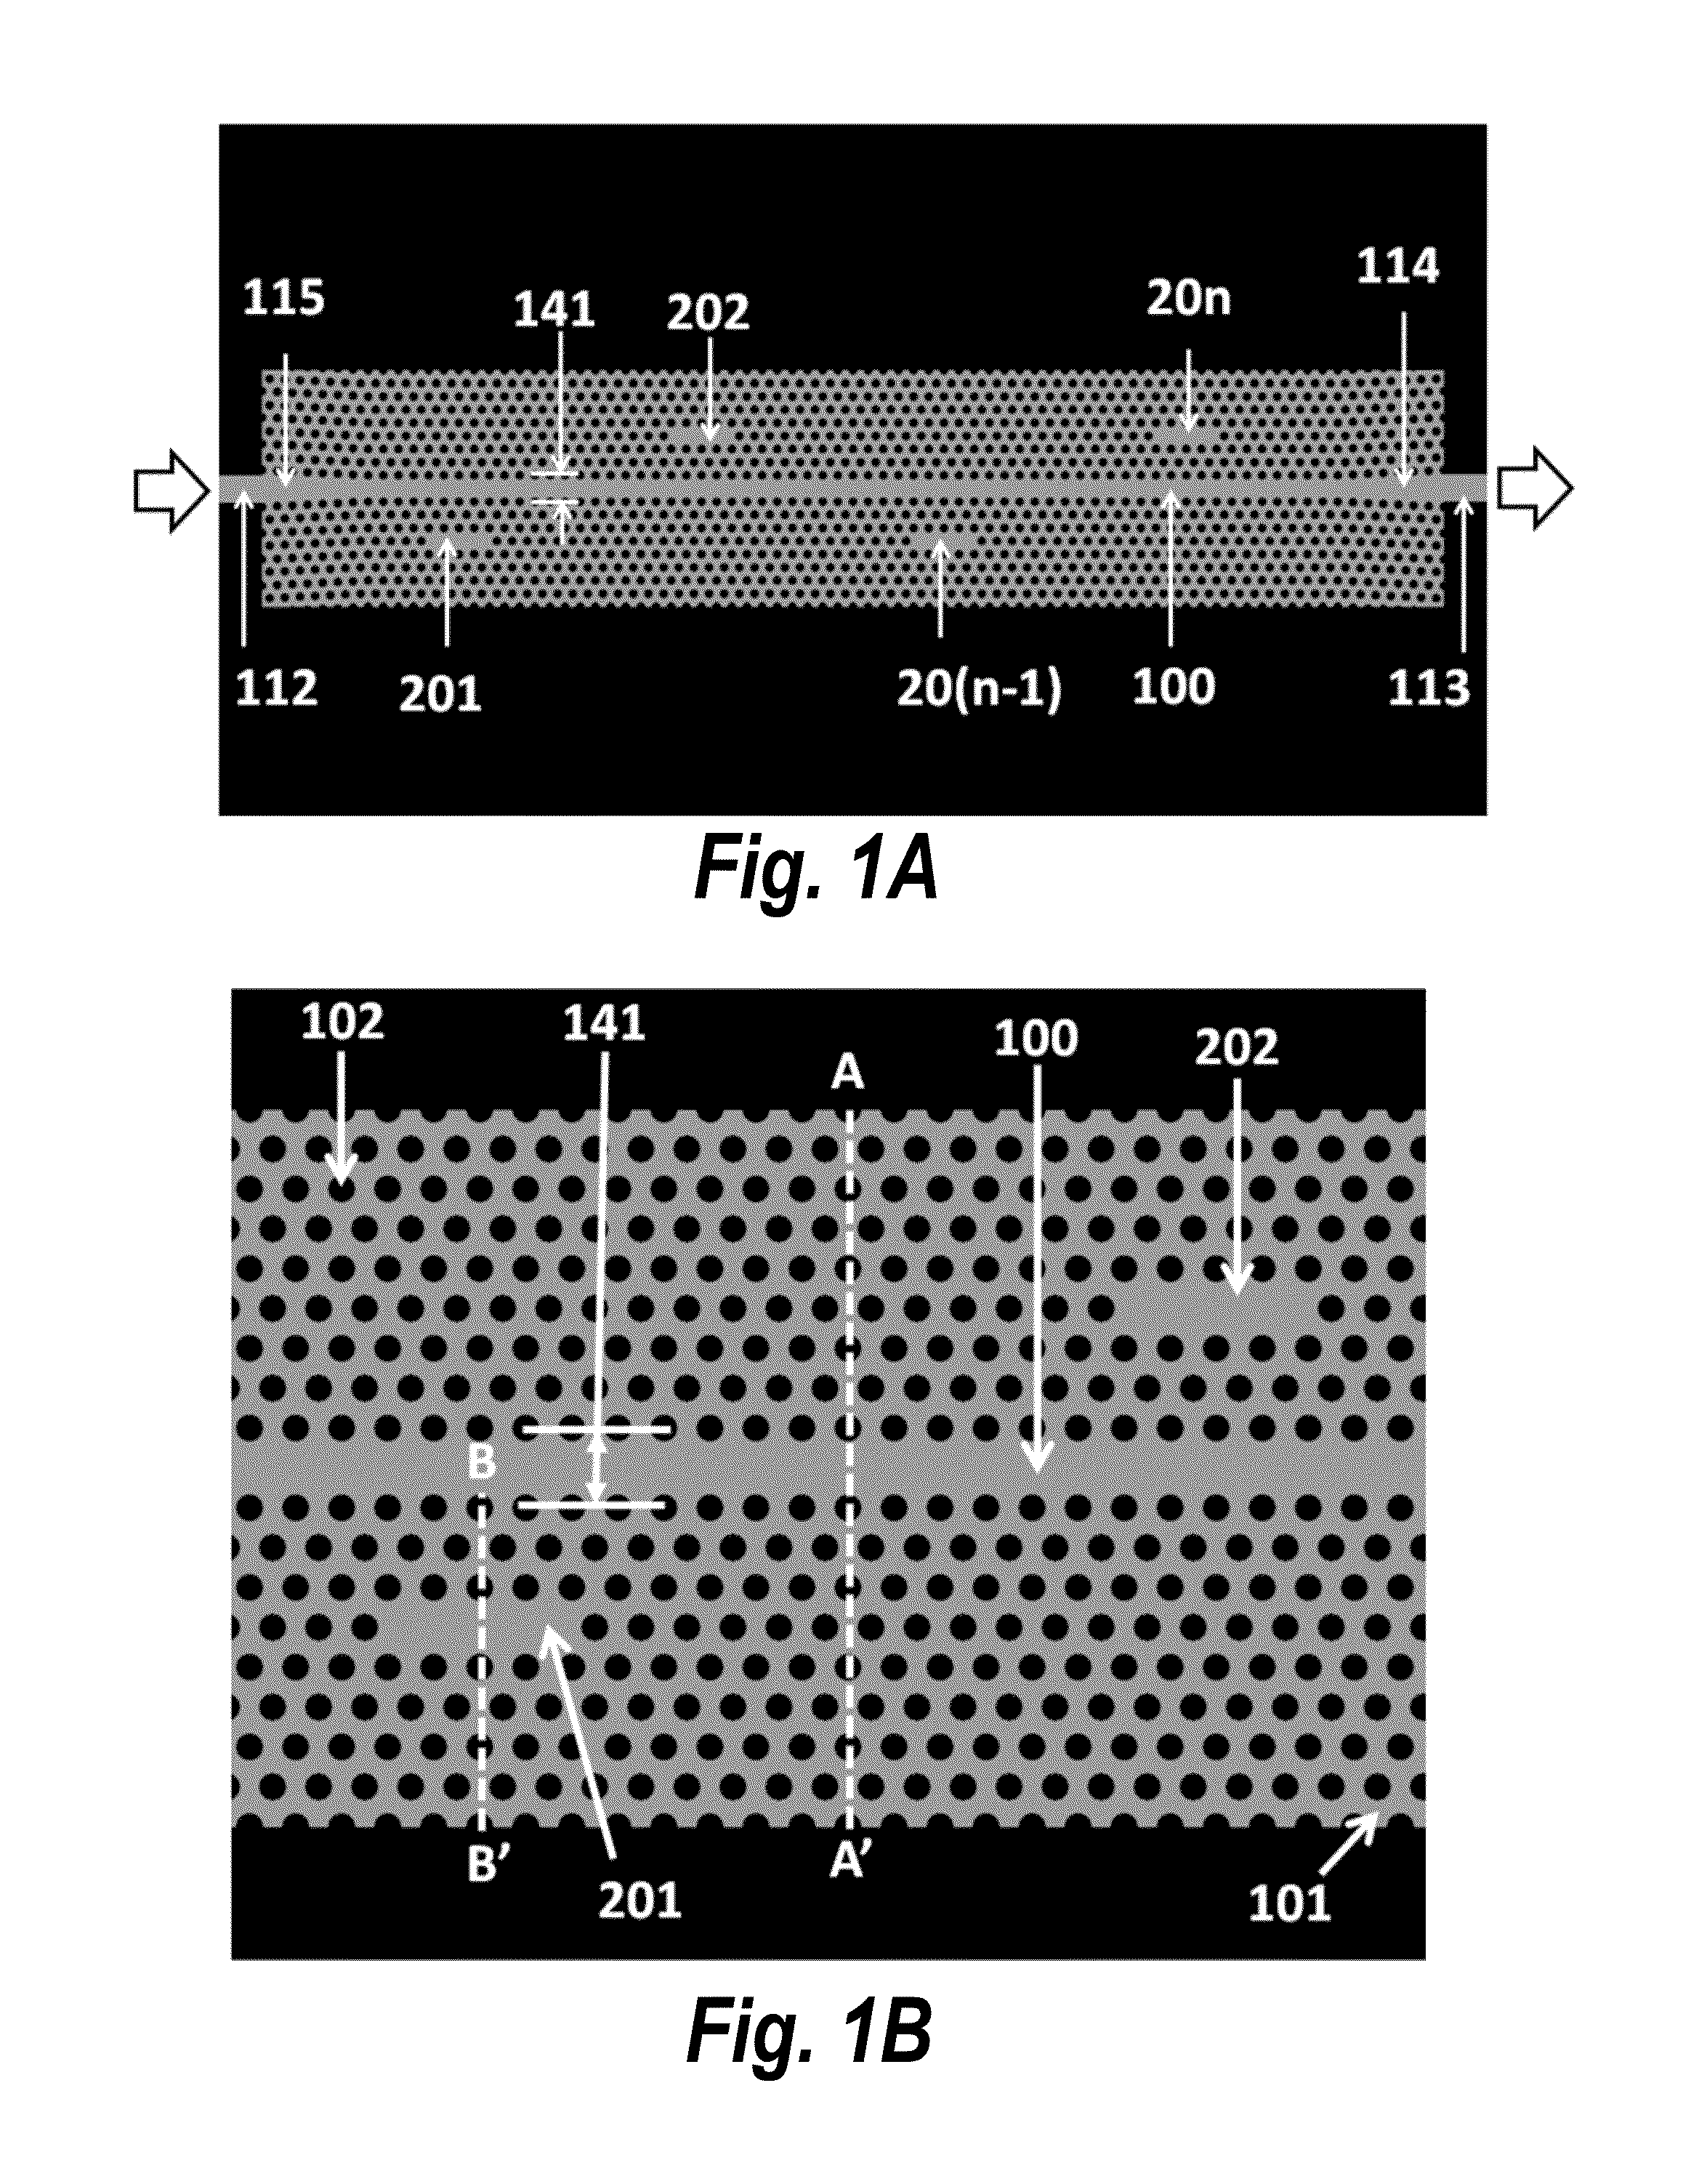 Two-Dimensional Photonic Crystal MicroArray Measurement Method and Apparatus for Highly-Sensitive Label-Free Multiple Analyte Sensing, Biosensing, and Diagnostic Assay